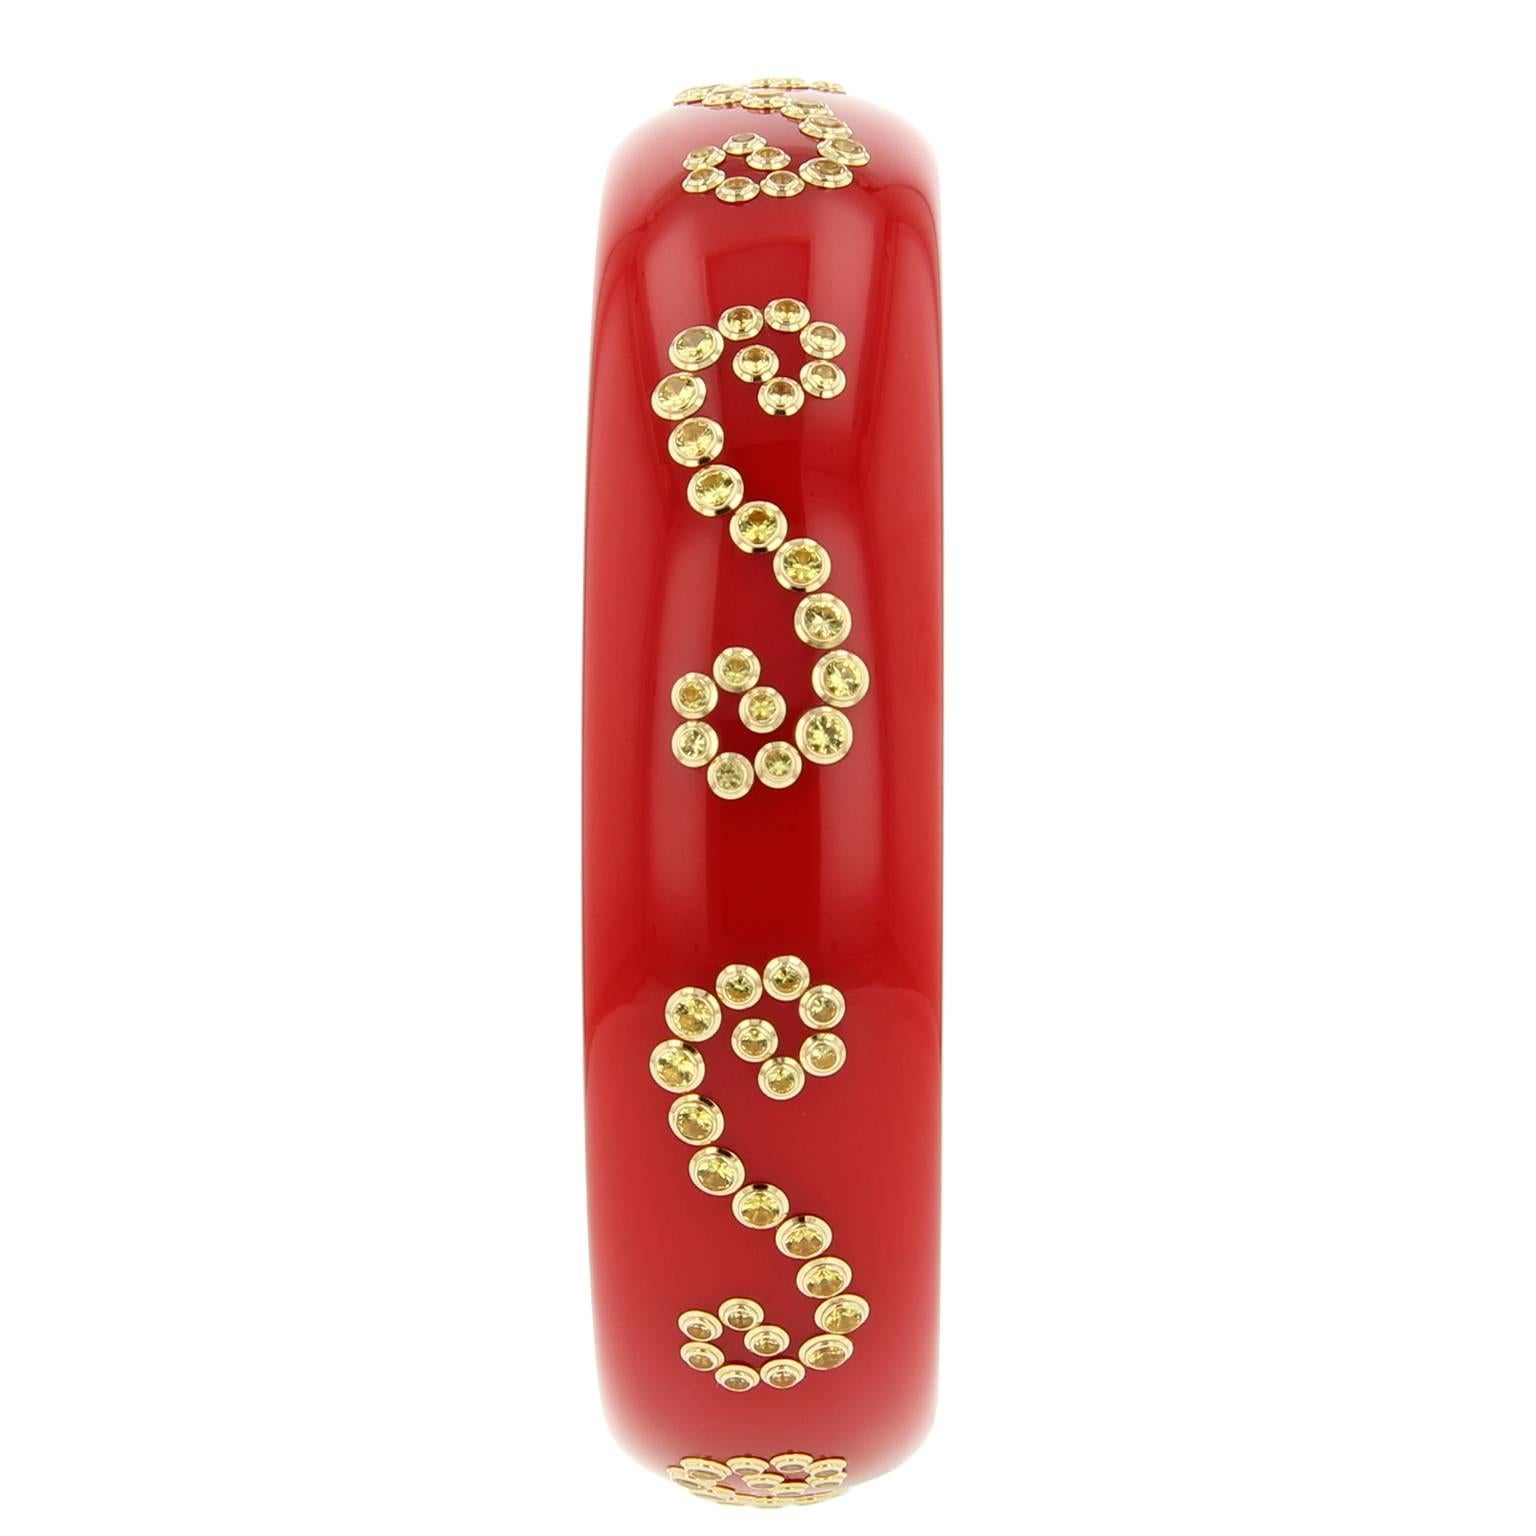 This impactful Mark Davis bangle was handcrafted using solid bright red vintage bakelite. It is decorated with fine yellow sapphires set in 18k yellow gold bezels creating an elegant scroll motif.

Full details below: 
• From the Mark Davis Bakelite